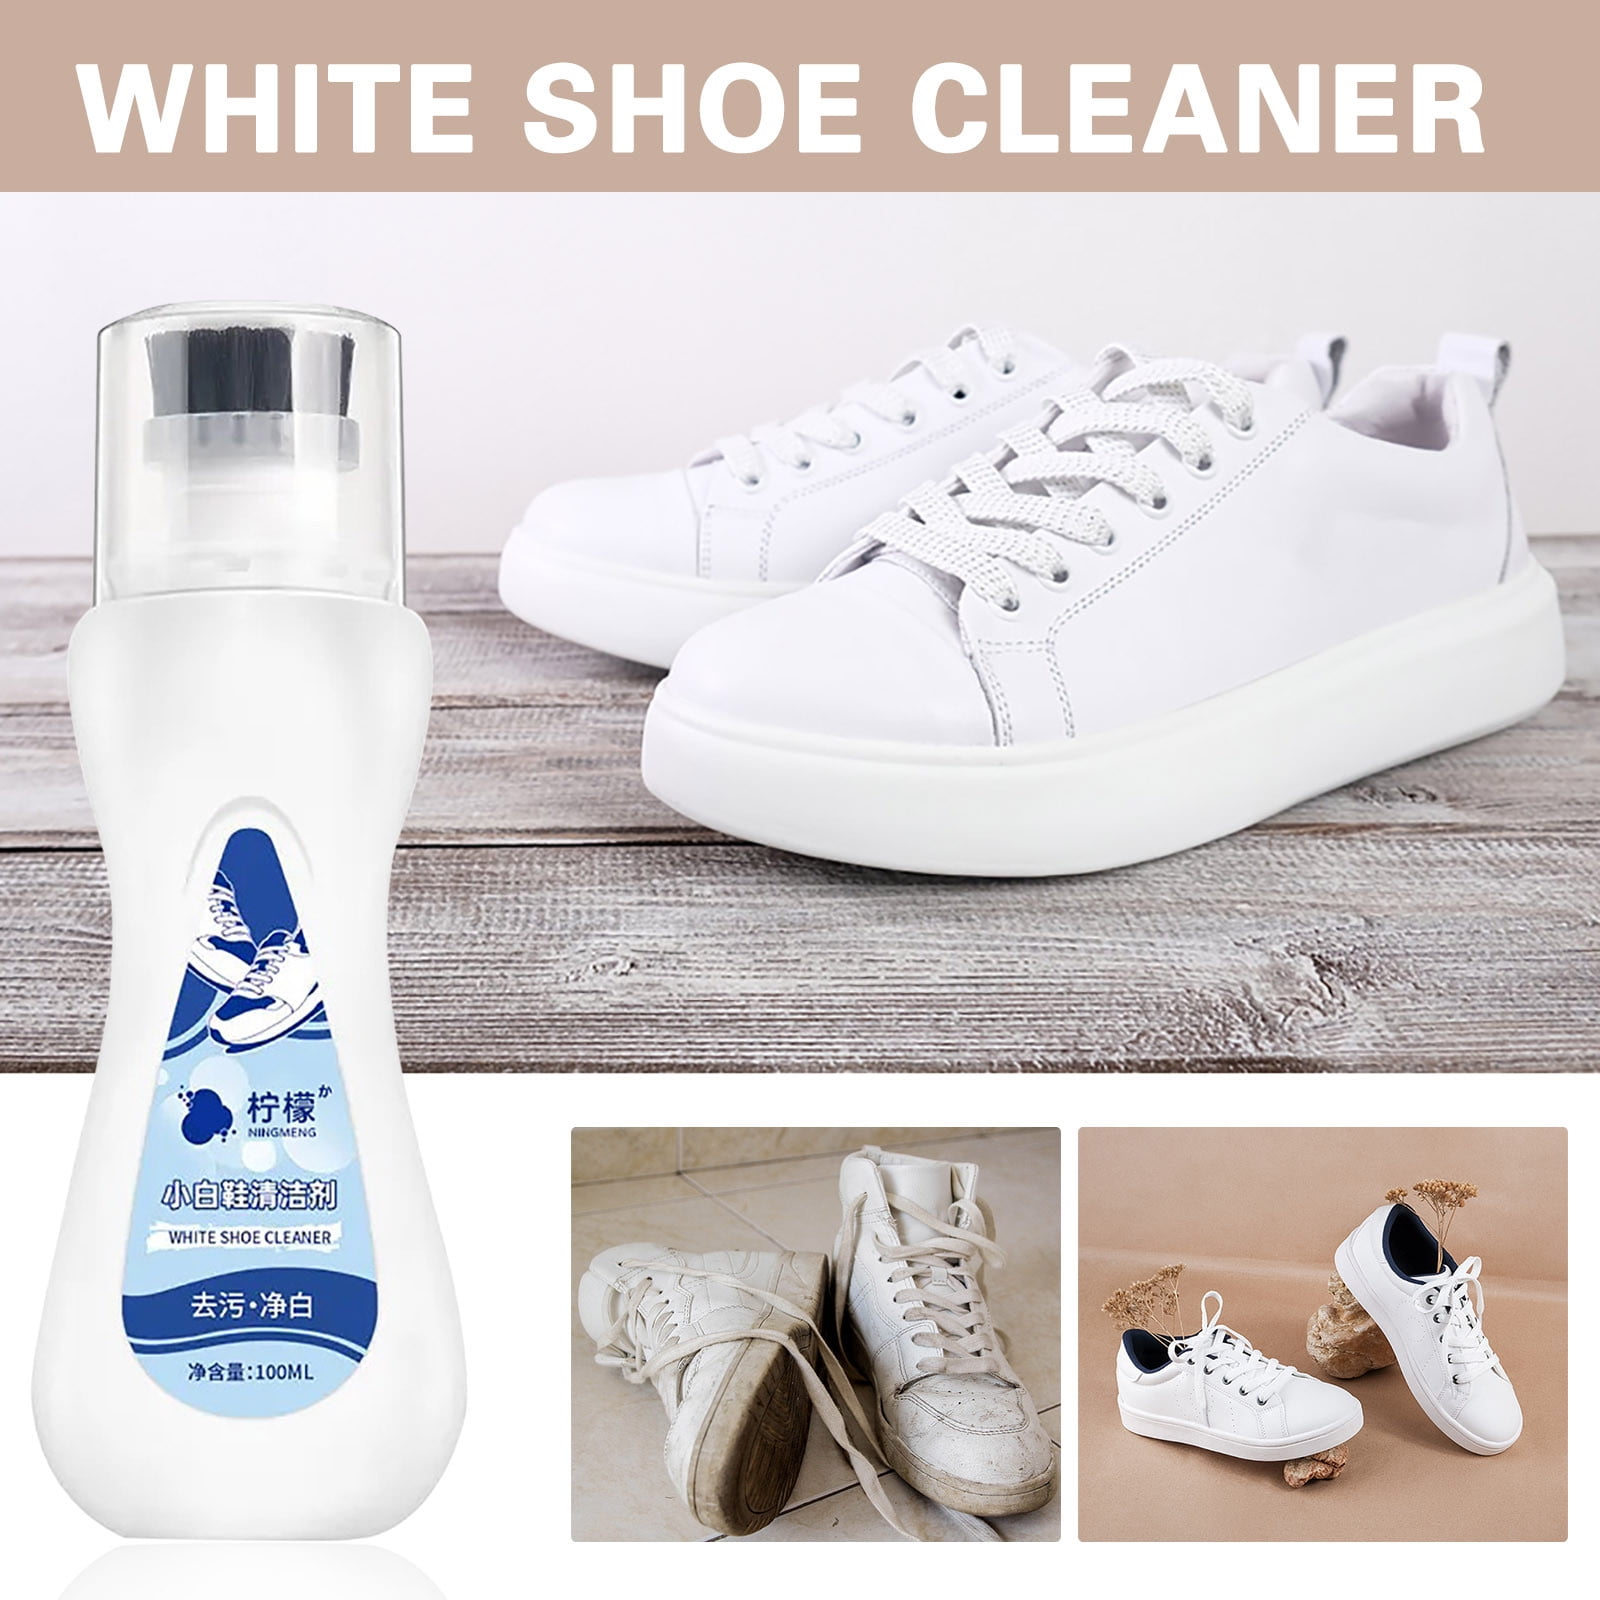 Shoe Cleaner+Shoe Whitener, Sneaker Cleaner, Brush-Shoe Cleaning Kit, Size: One size, Other